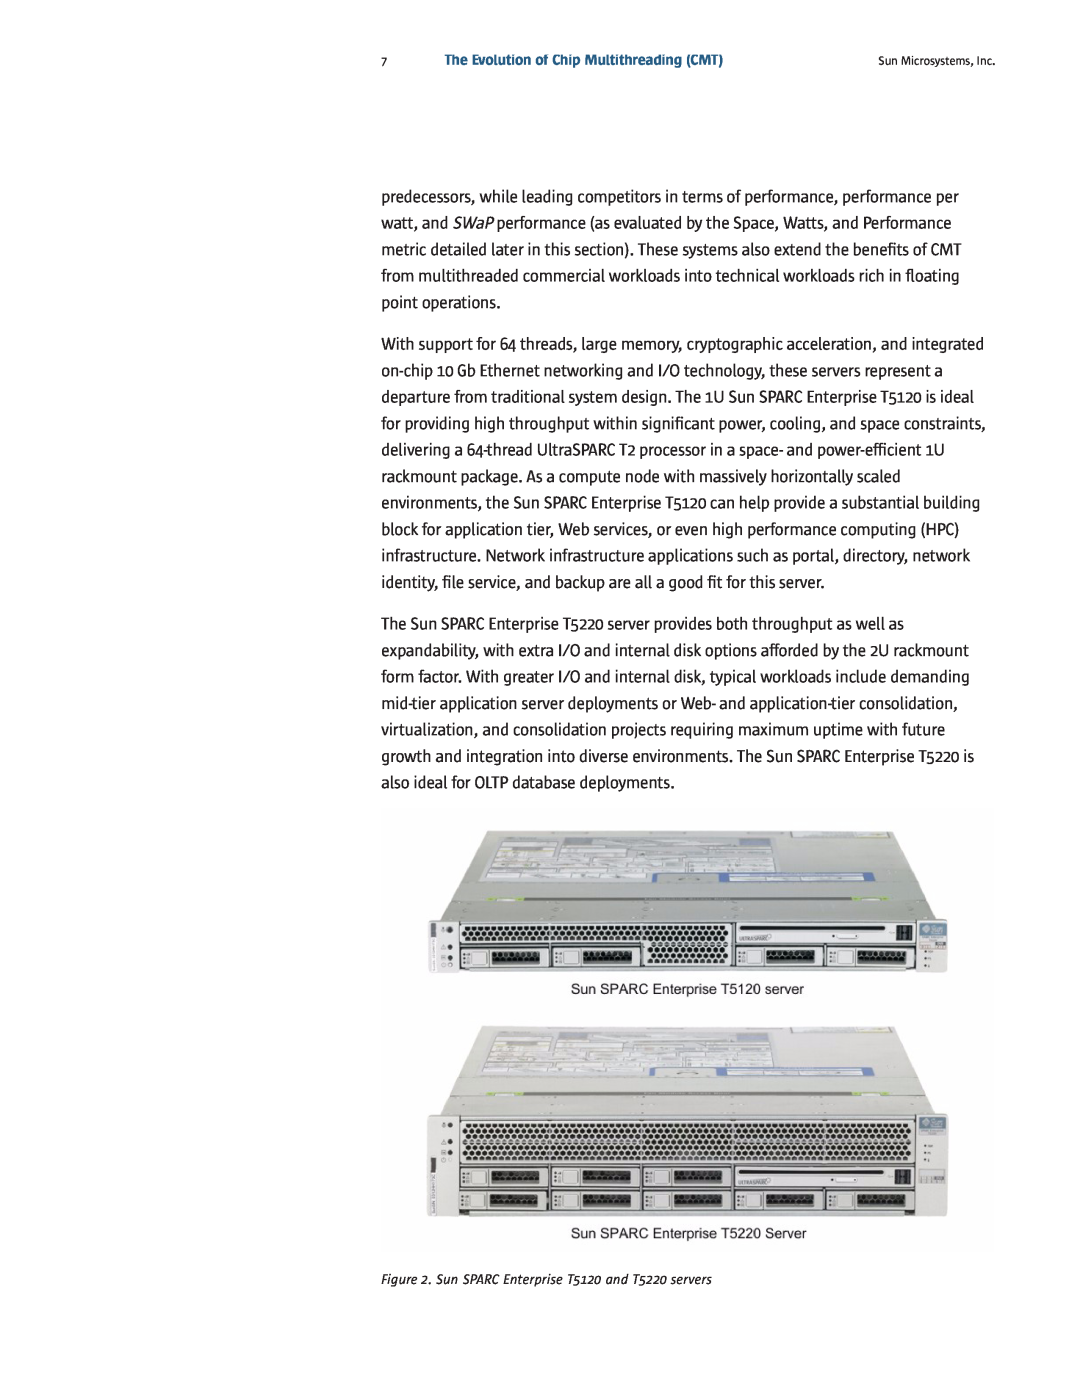 Sun Microsystems manual The Evolution of Chip Multithreading CMT, Sun SPARC Enterprise T5120 and T5220 servers 